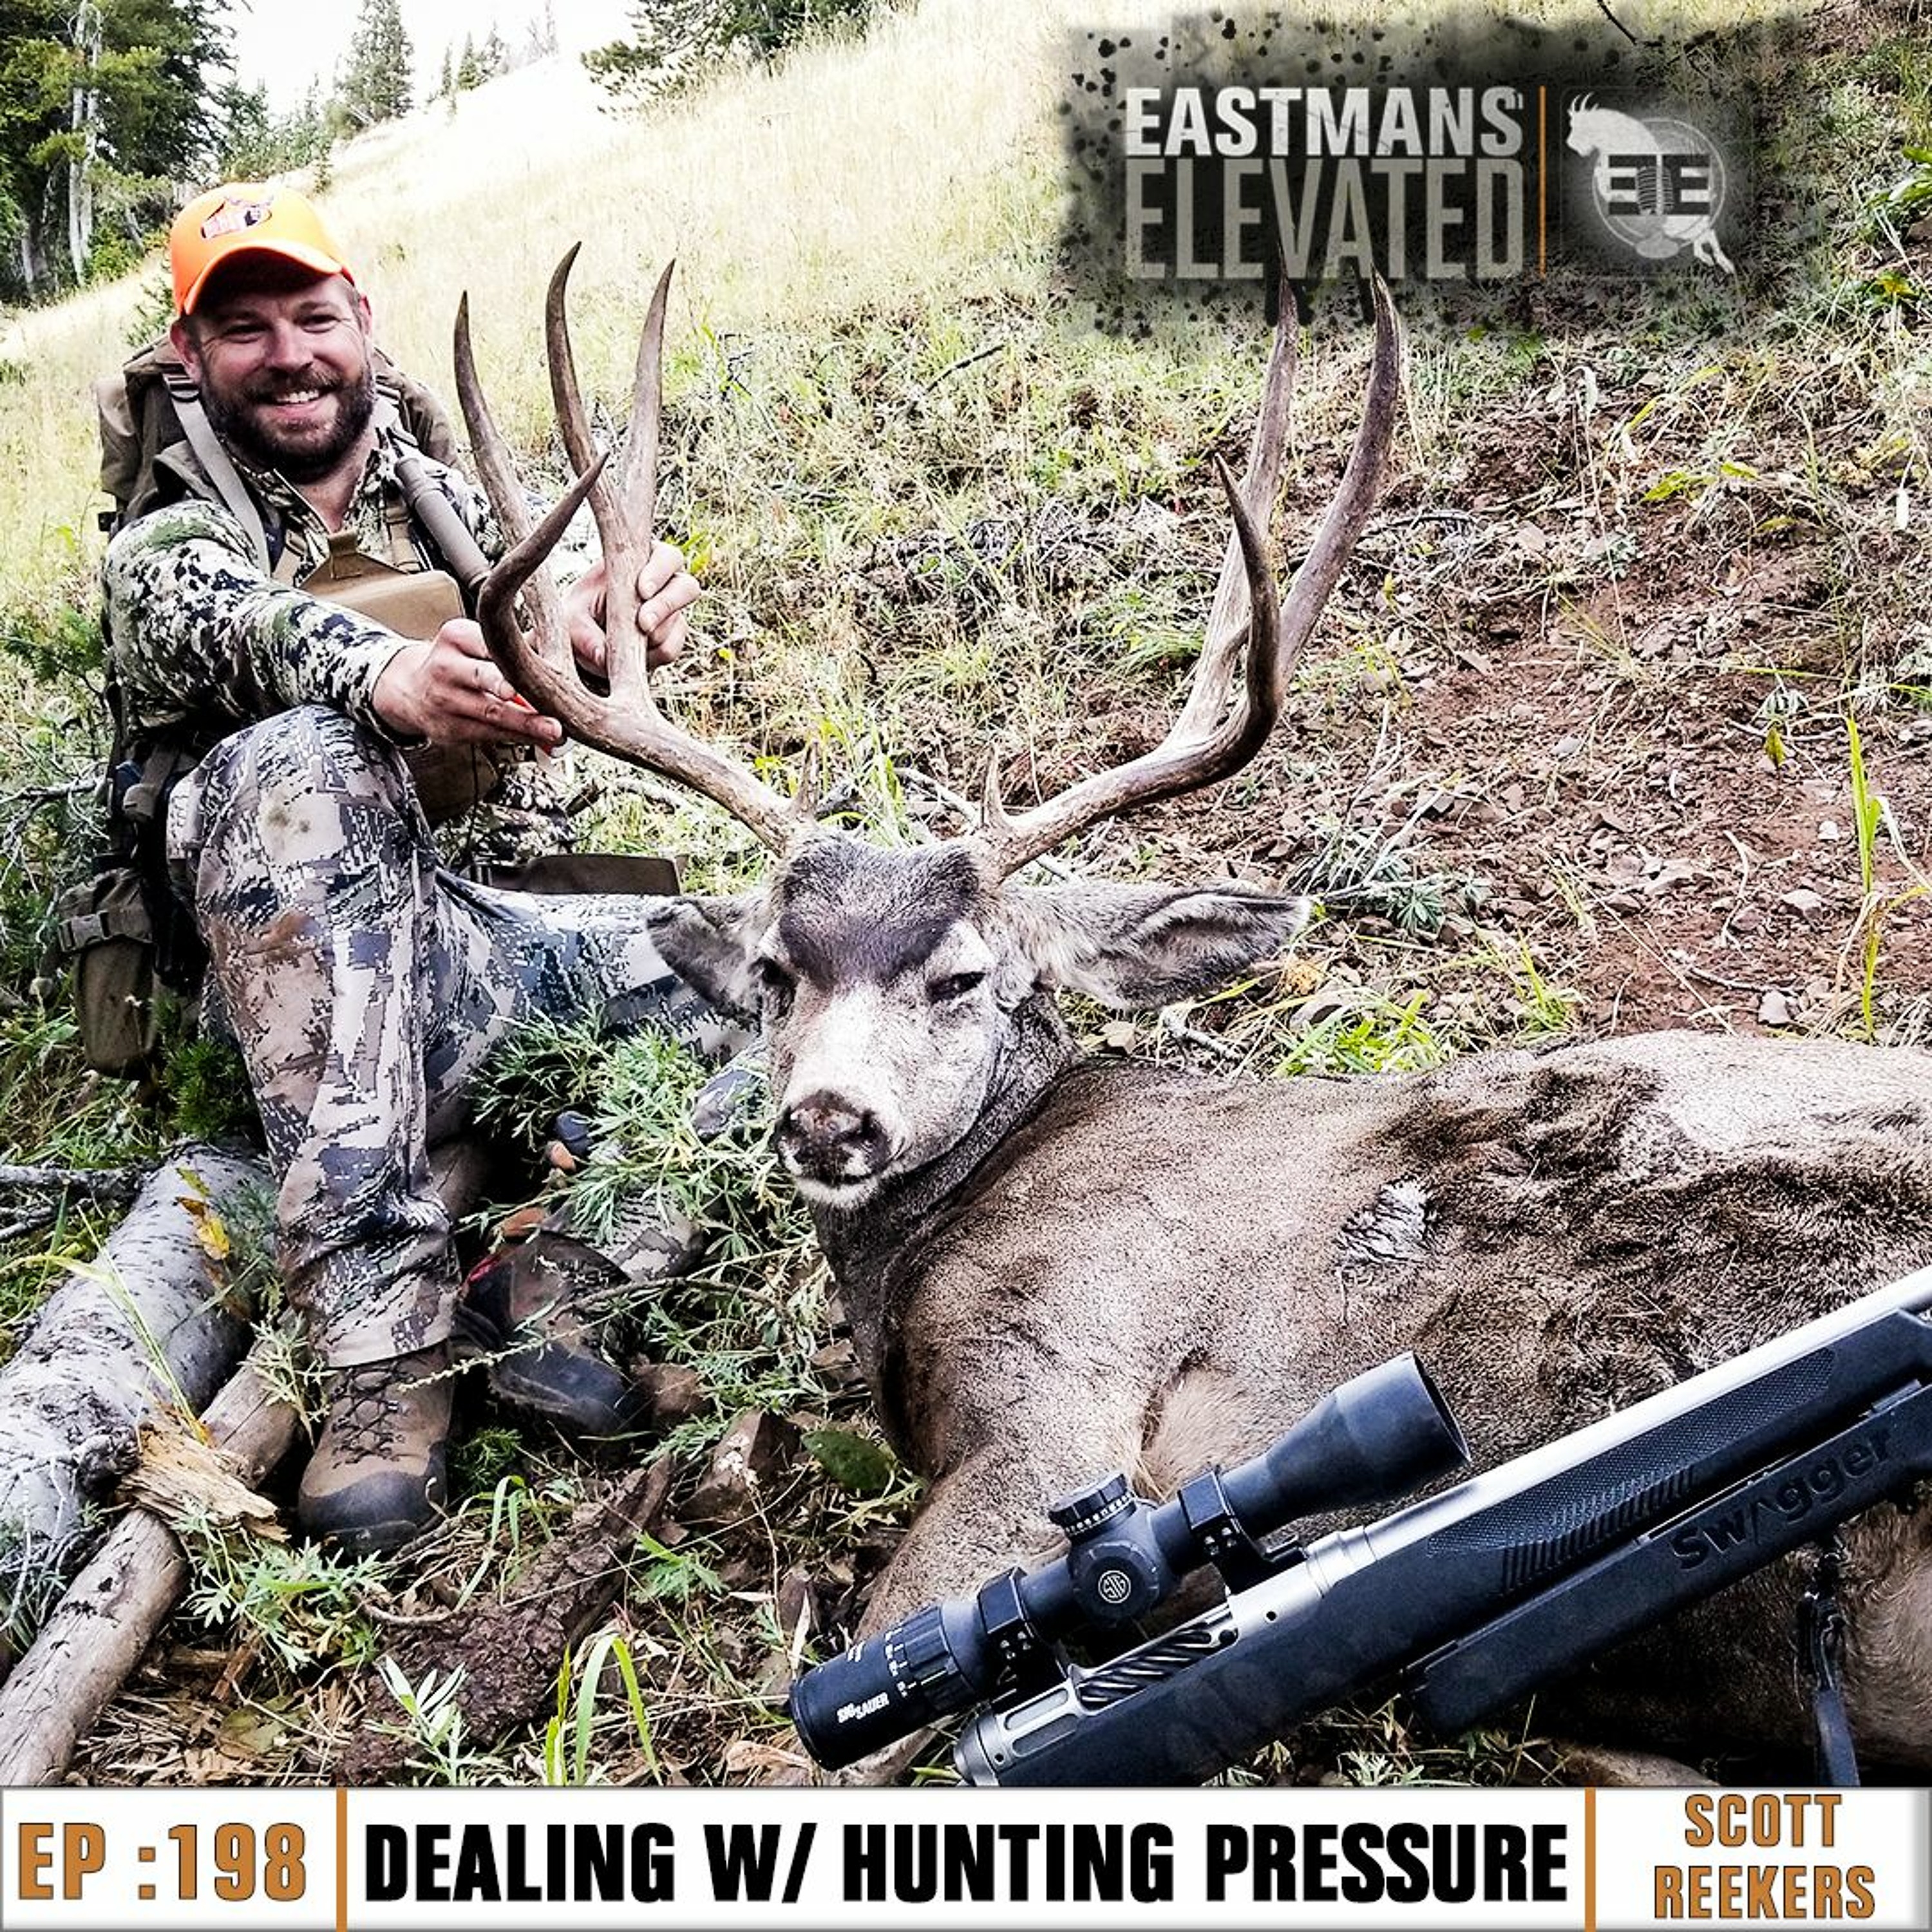 Episode 198: Dealing with Hunting Pressure with Scott Reekers